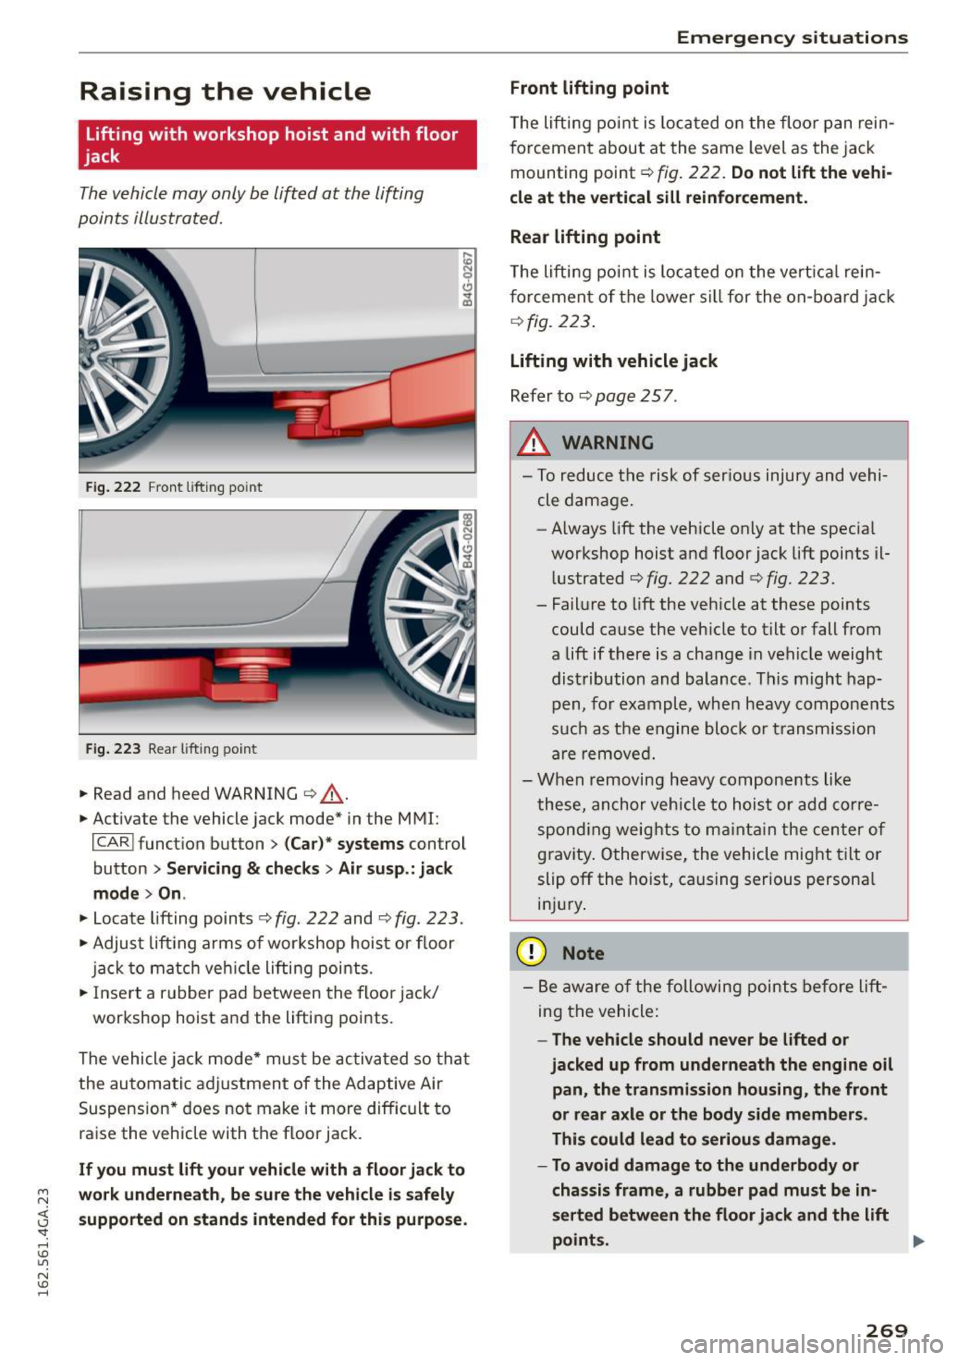 AUDI S7 2016 User Guide M N <( I.J "". rl I.O 
" N I.O rl 
Raising  the  vehicle 
lifting  with  workshop  hoist  and  with  floor 
jack 
The vehicle may  only  be  lift ed at  the  lifting 
poin ts  illustra ted. 
F ig. 22